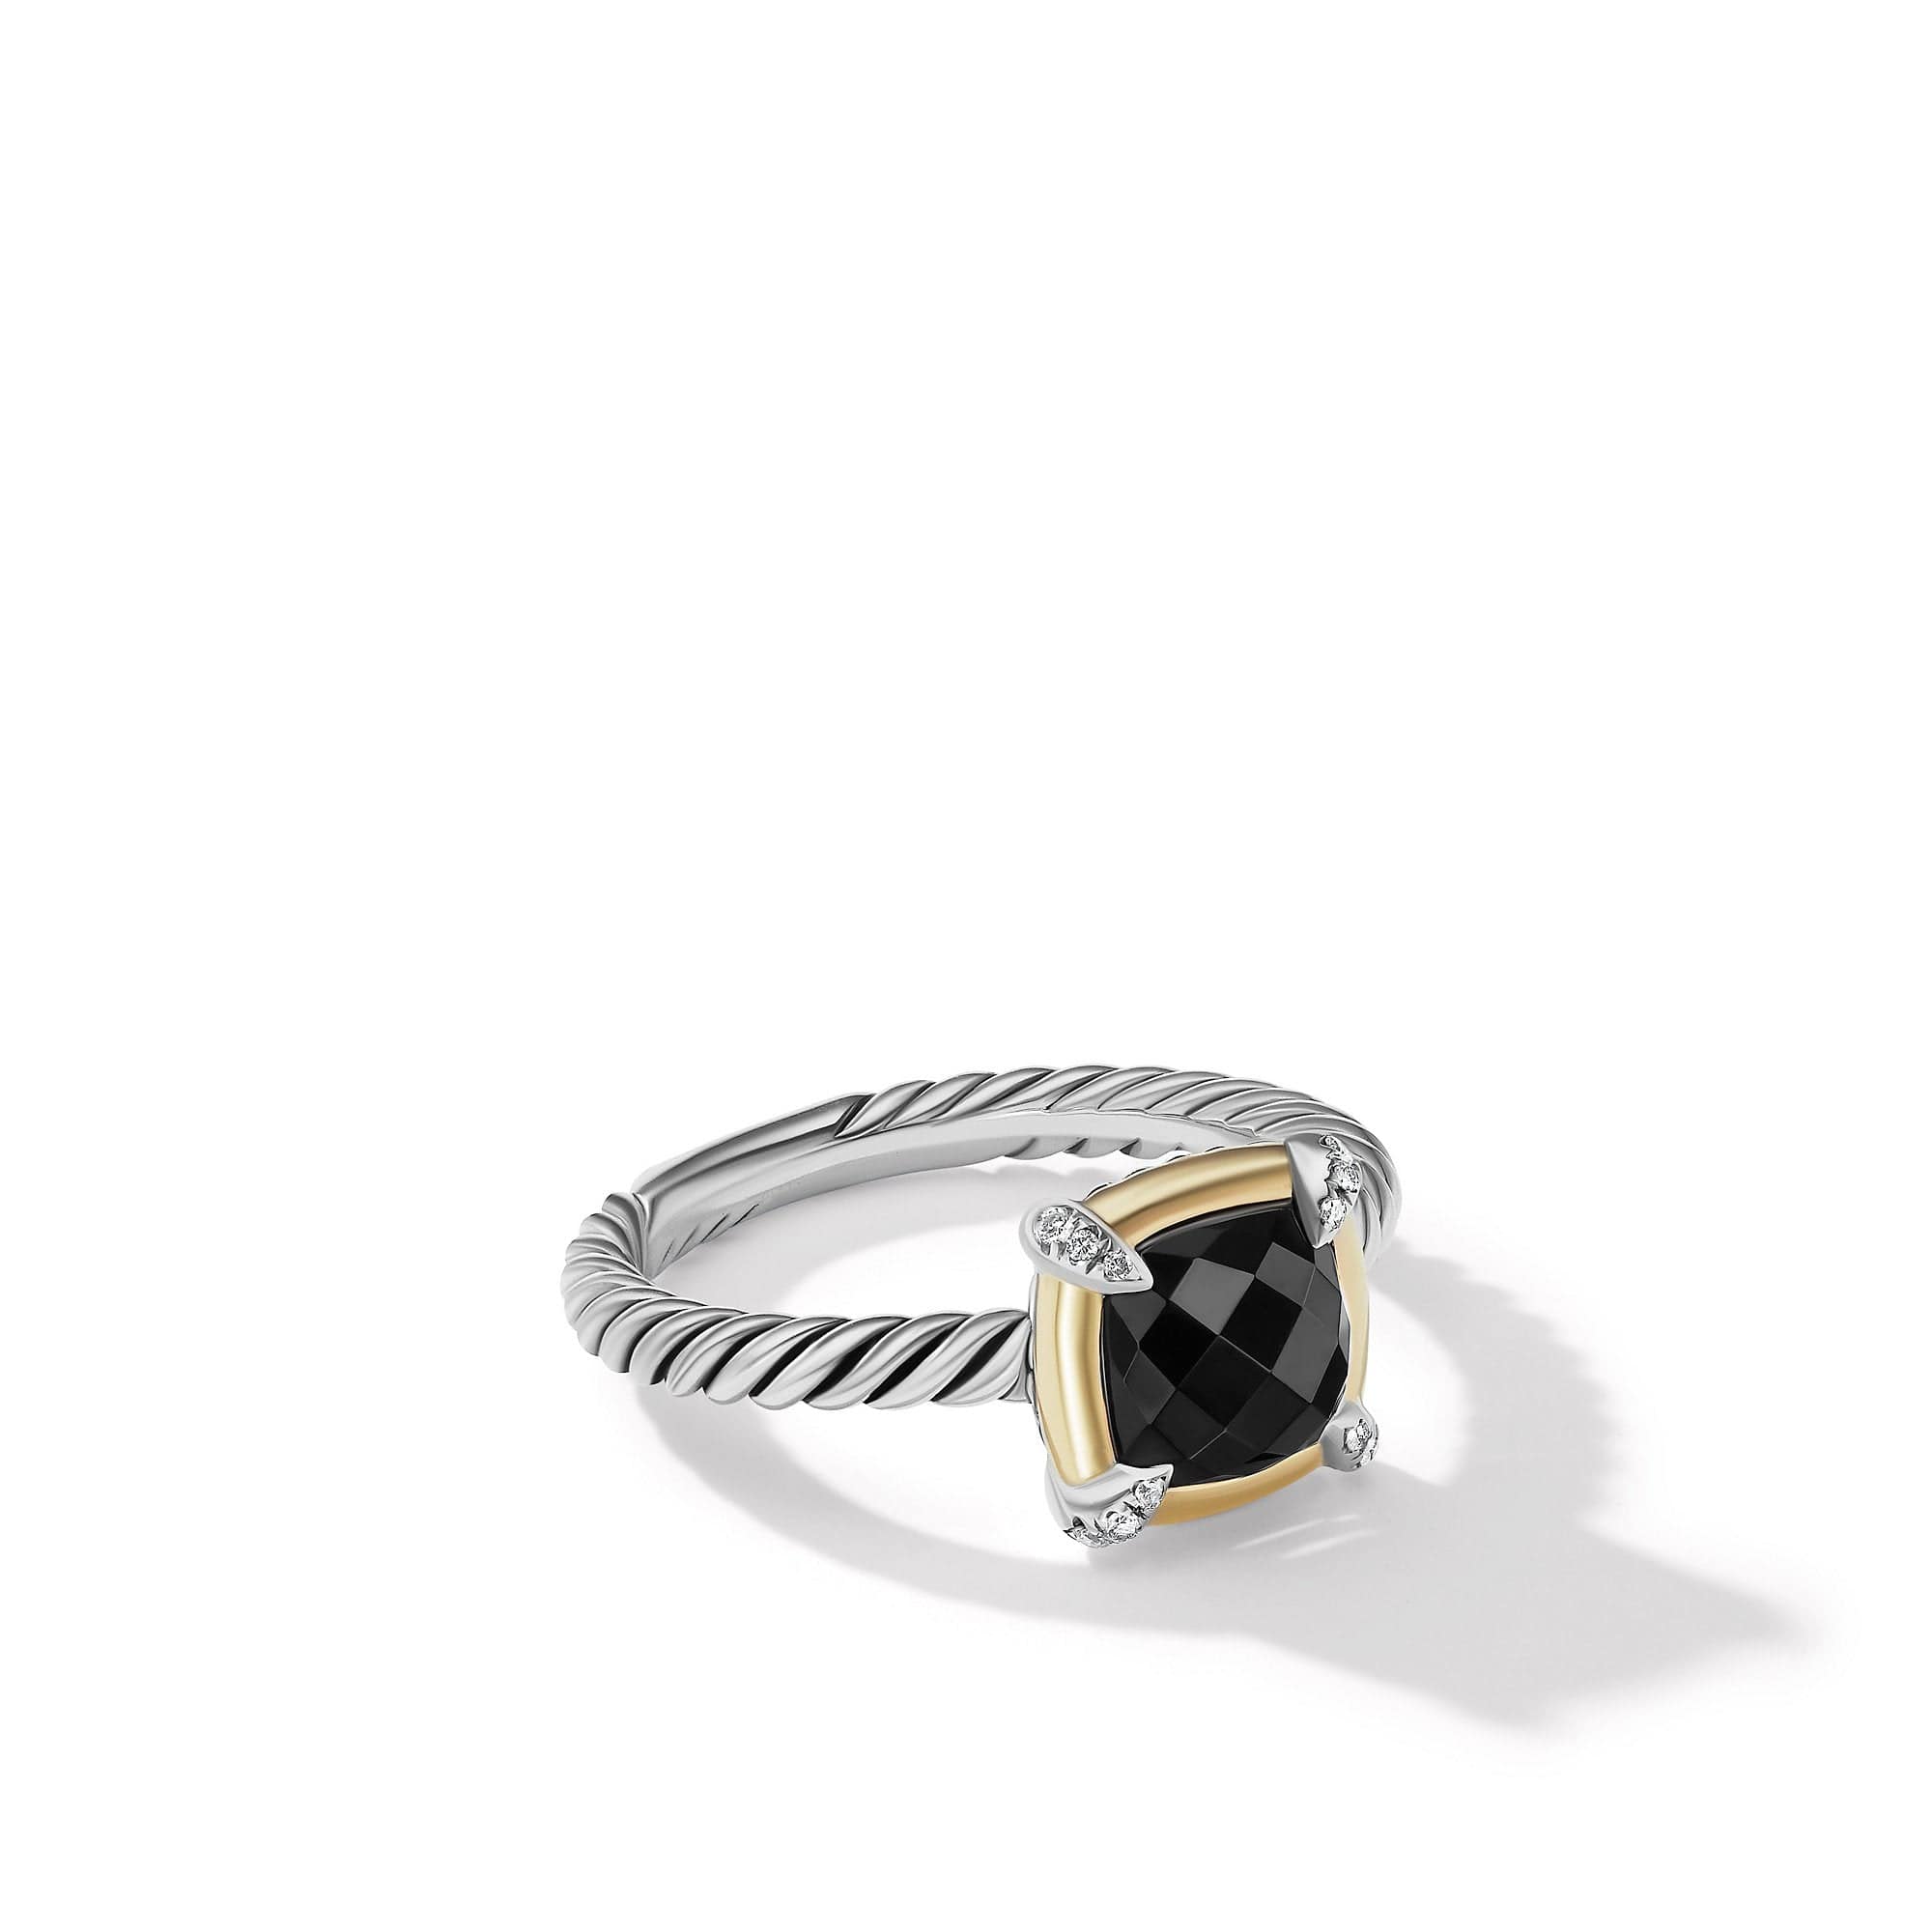 Petite Chatelaine® Ring with Black Onyx, 18K Yellow Gold Bezel and Pavé Diamonds